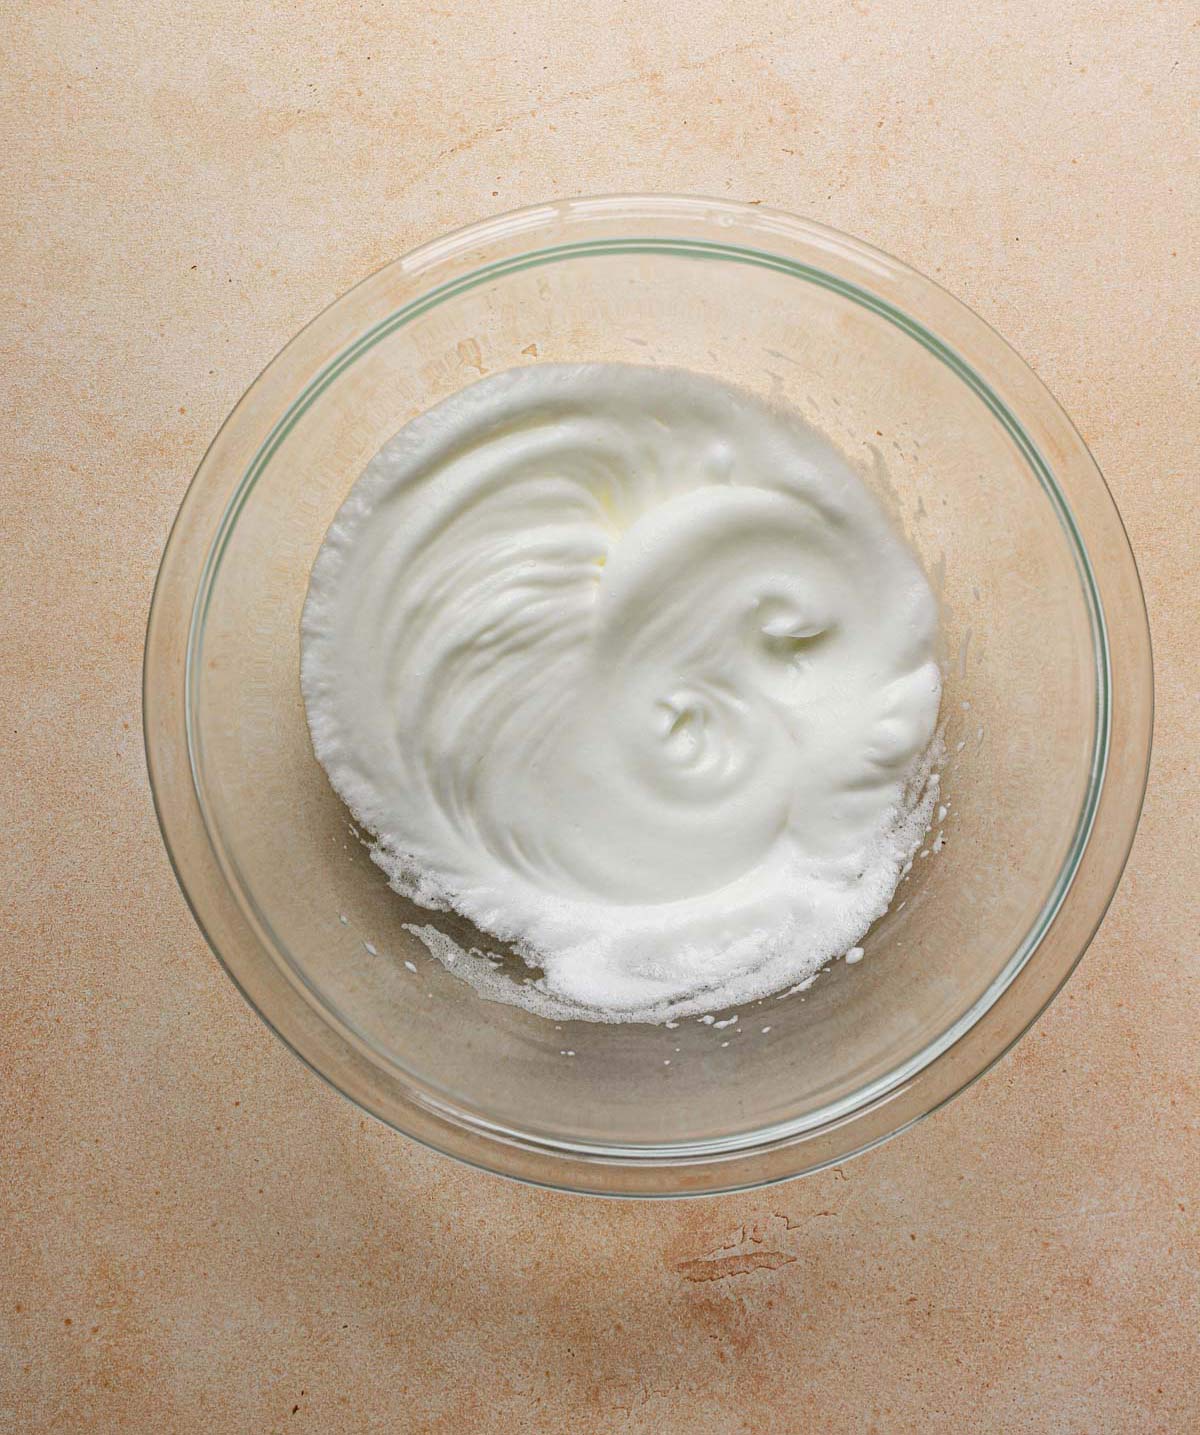 Whipped egg whites in a glass bowl.